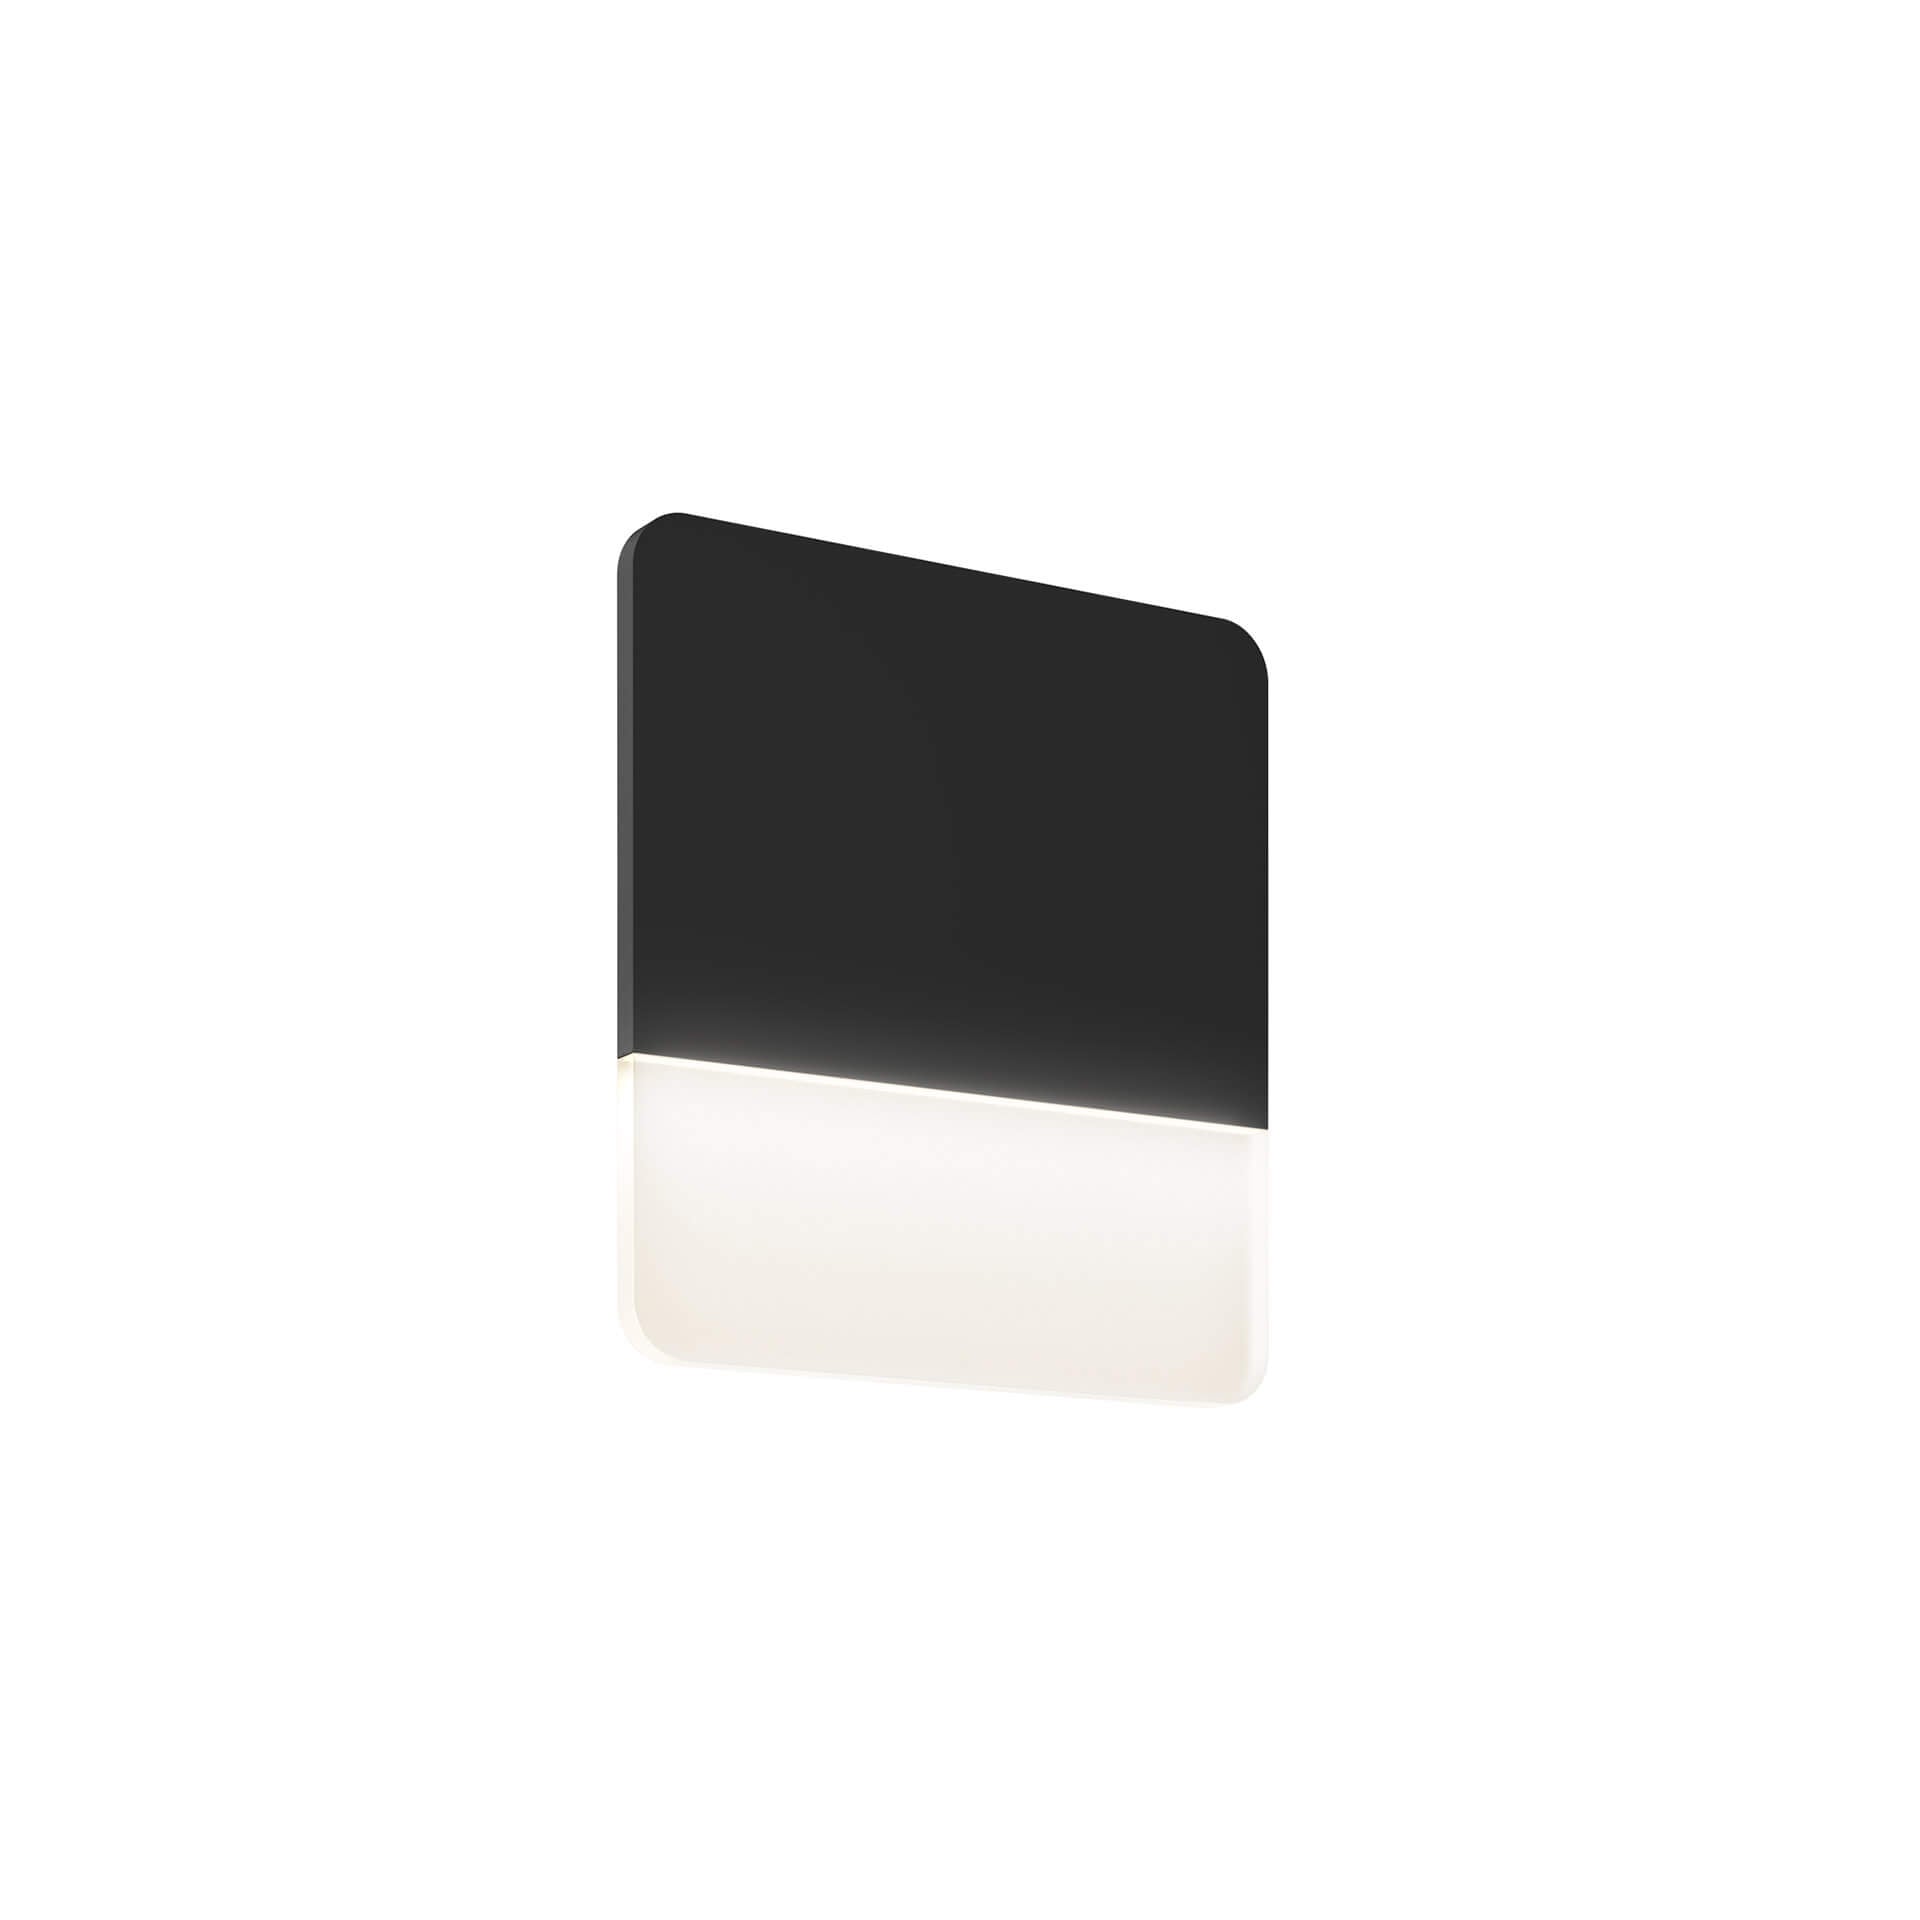 ALTO Outdoor wall lighting Black INTEGRATED LED - SQS10-3K-BK | DALS